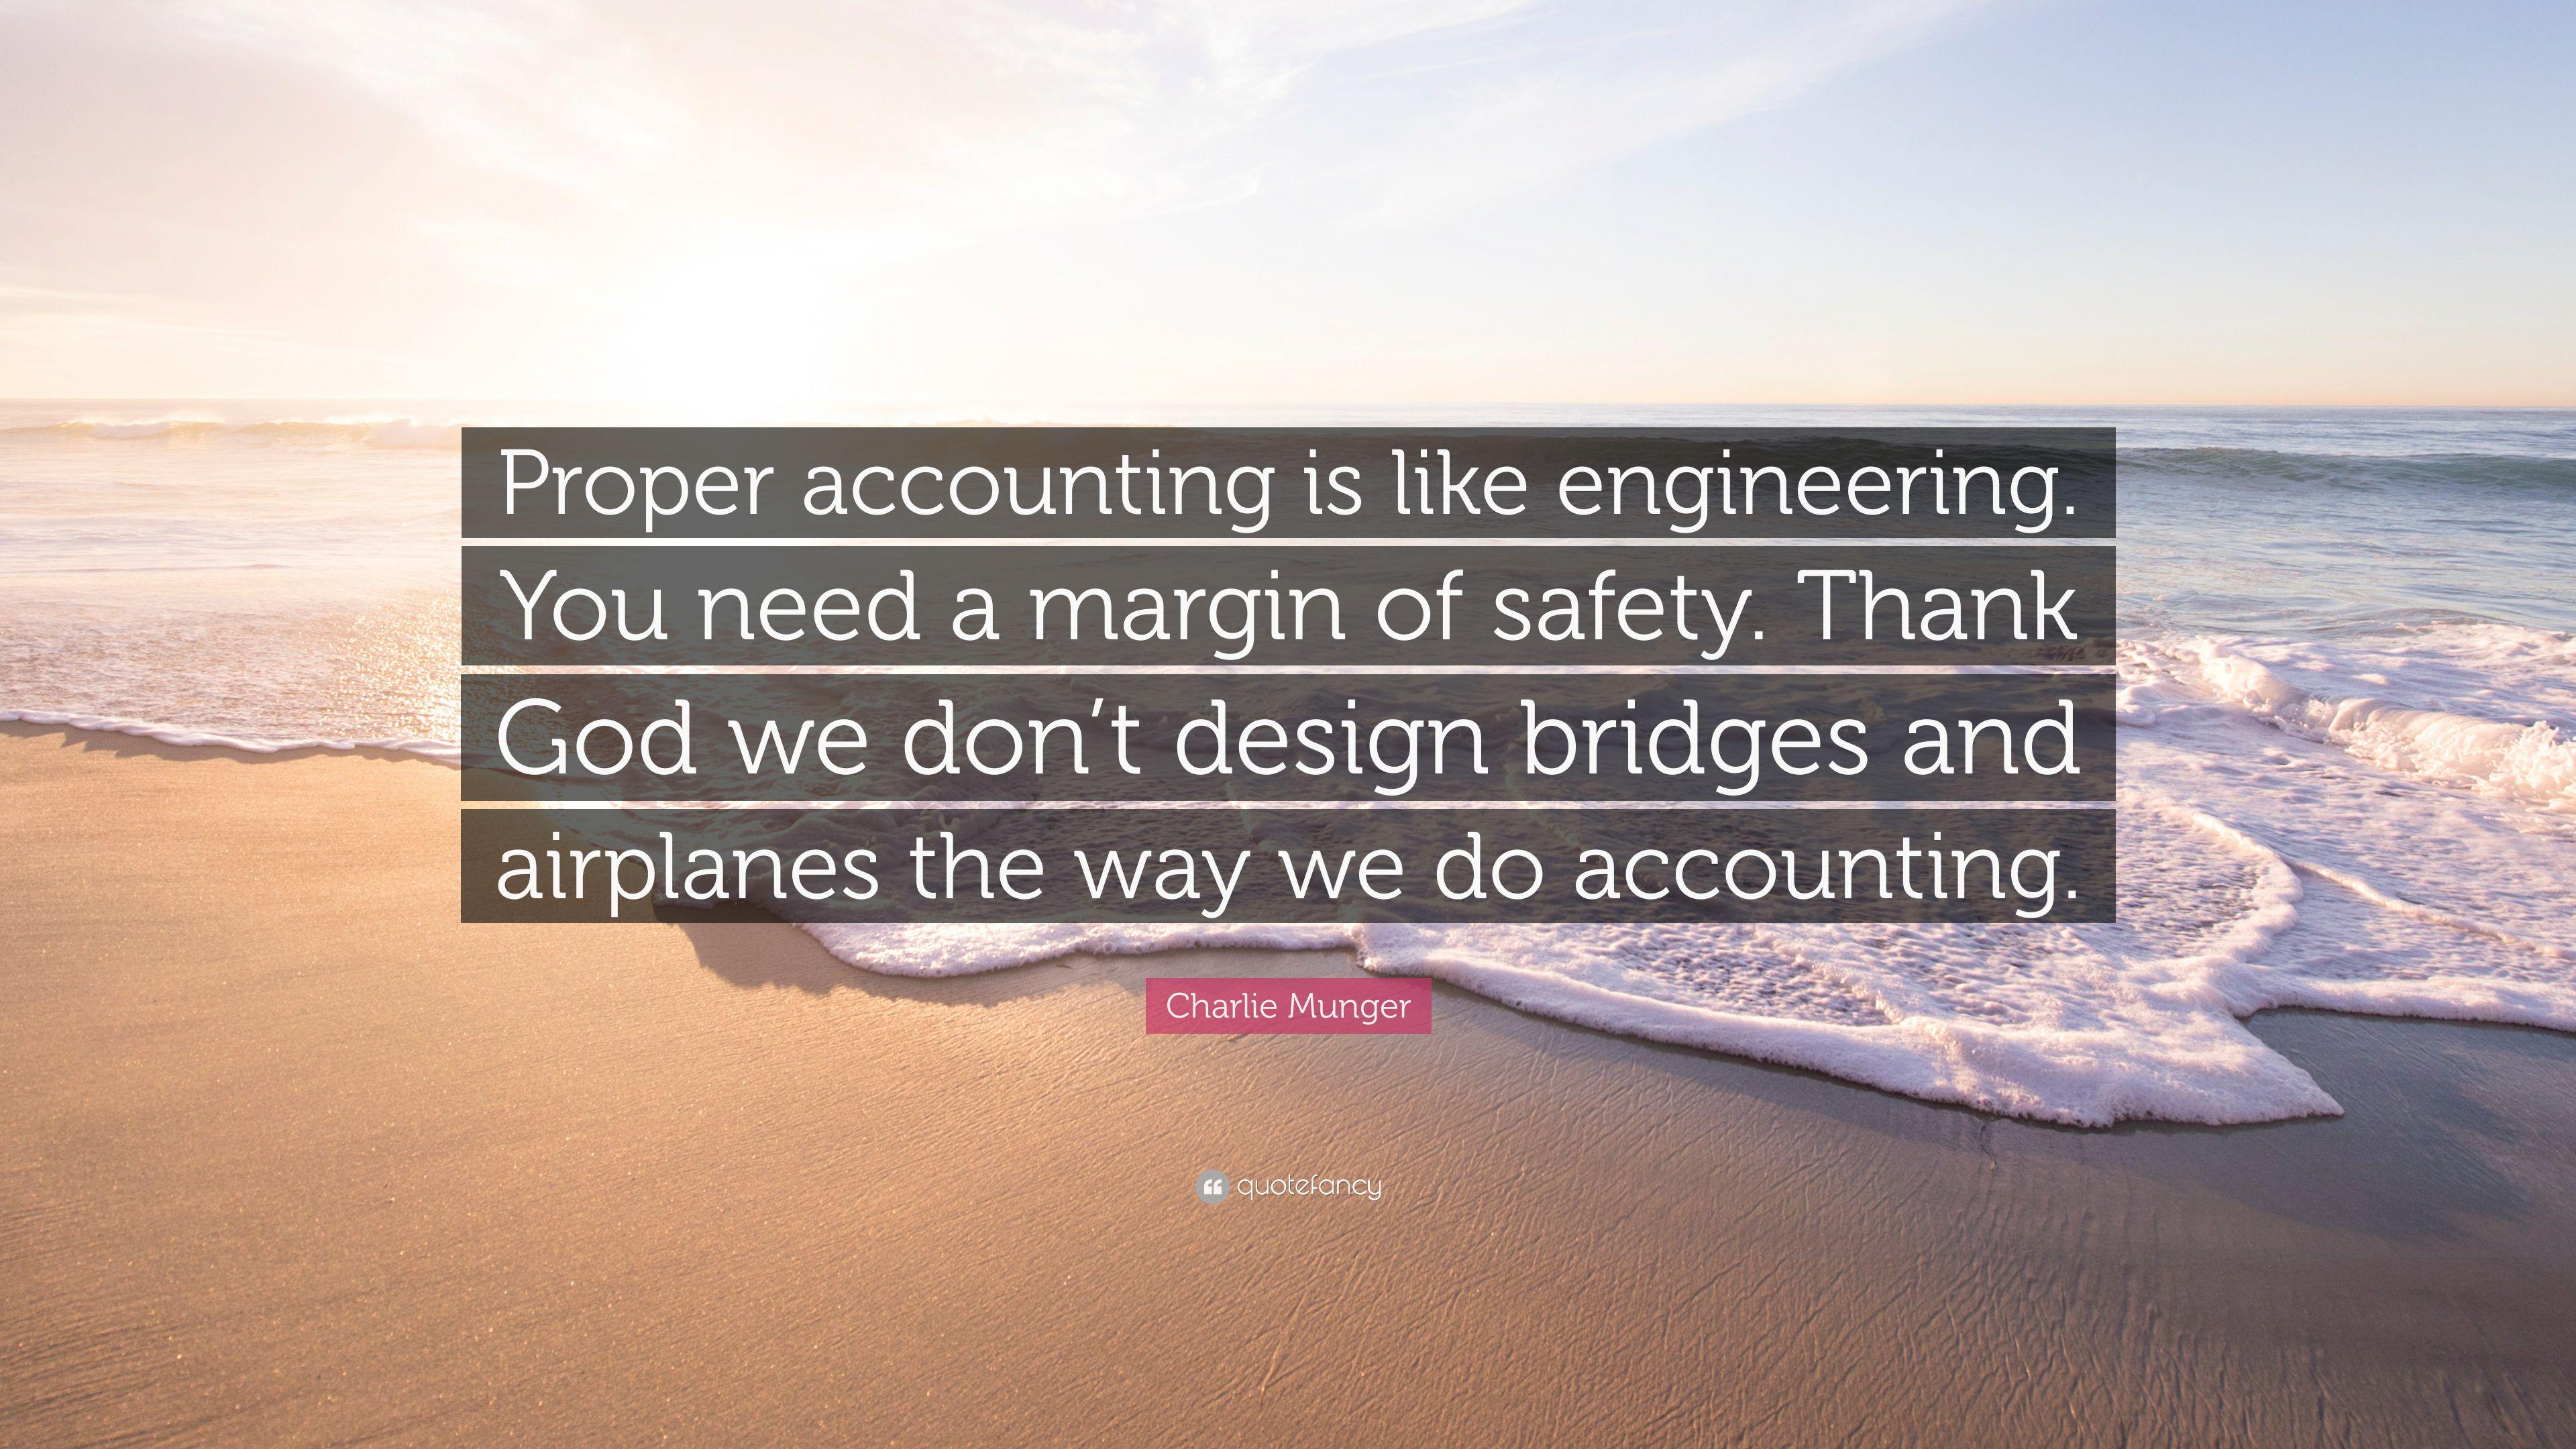 Charlie Munger Quote: “Proper accounting is like engineering. You